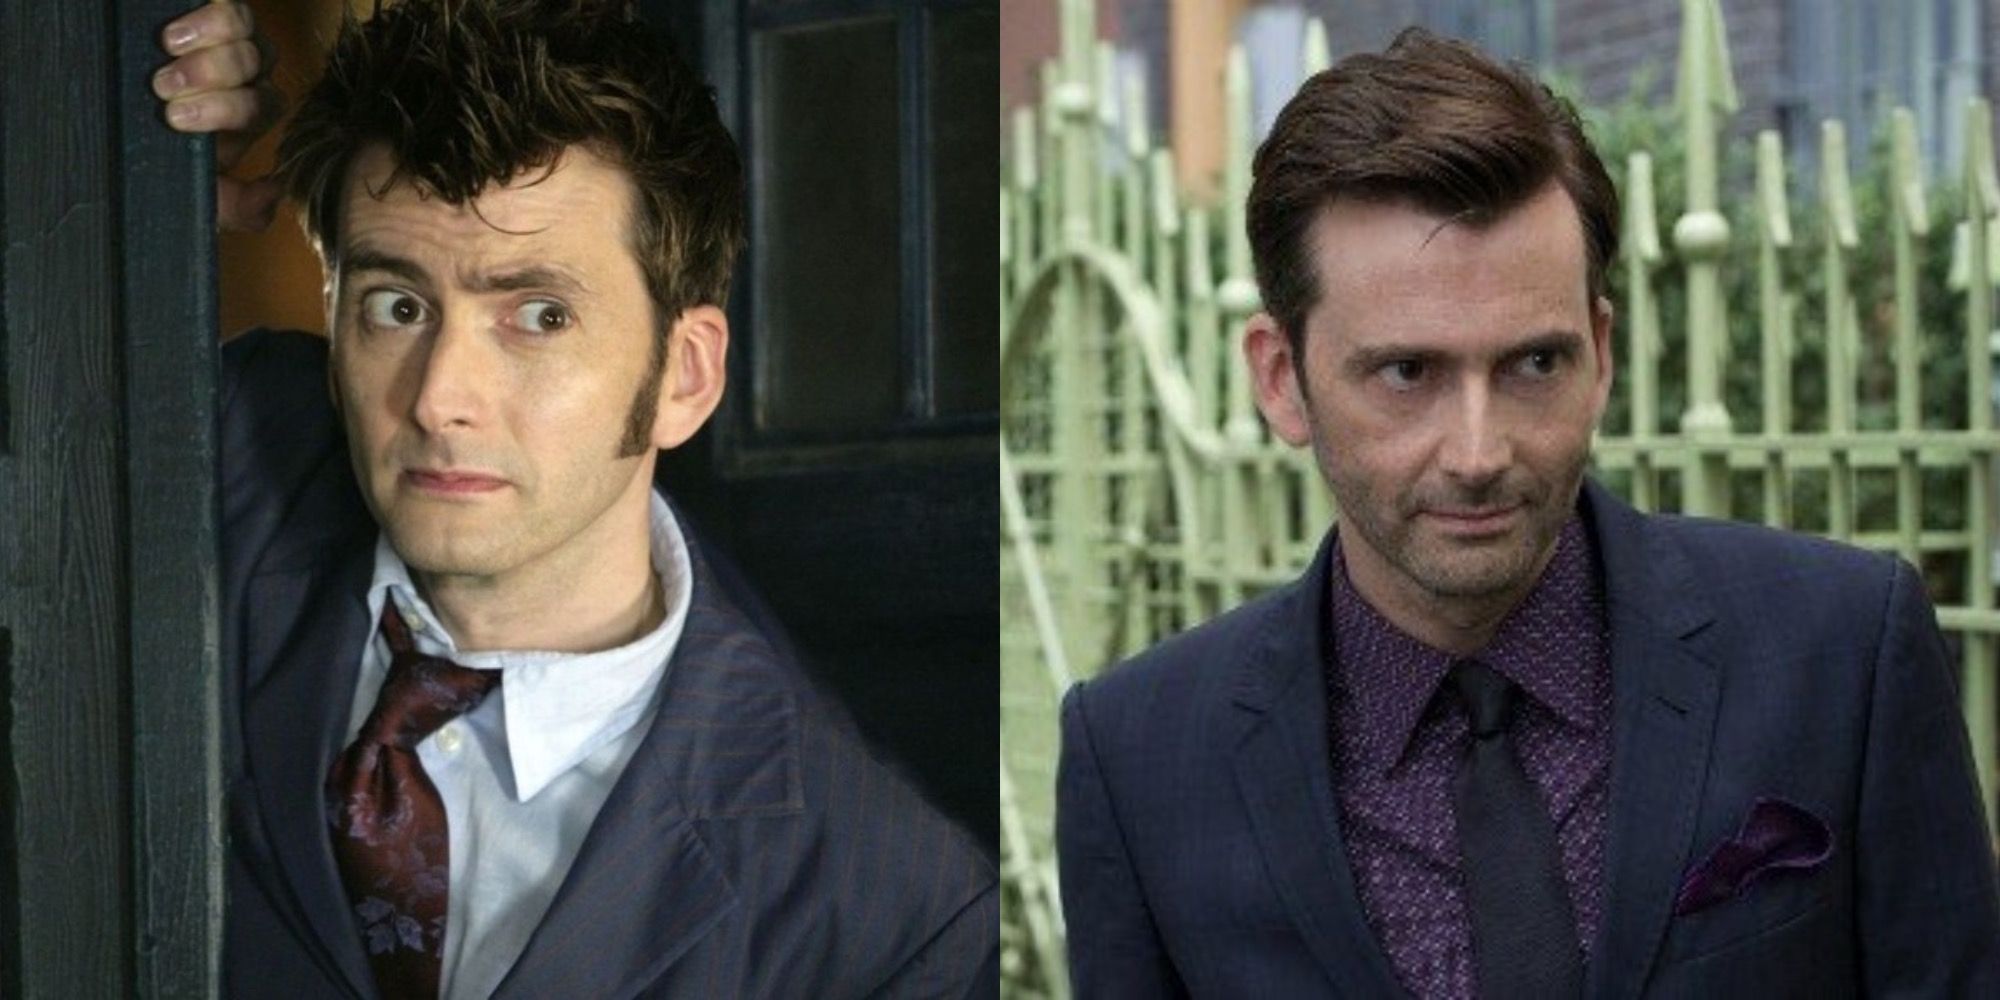 David Tennant as The Doctor in Doctor Who and Kilgrave in Jessica Jones